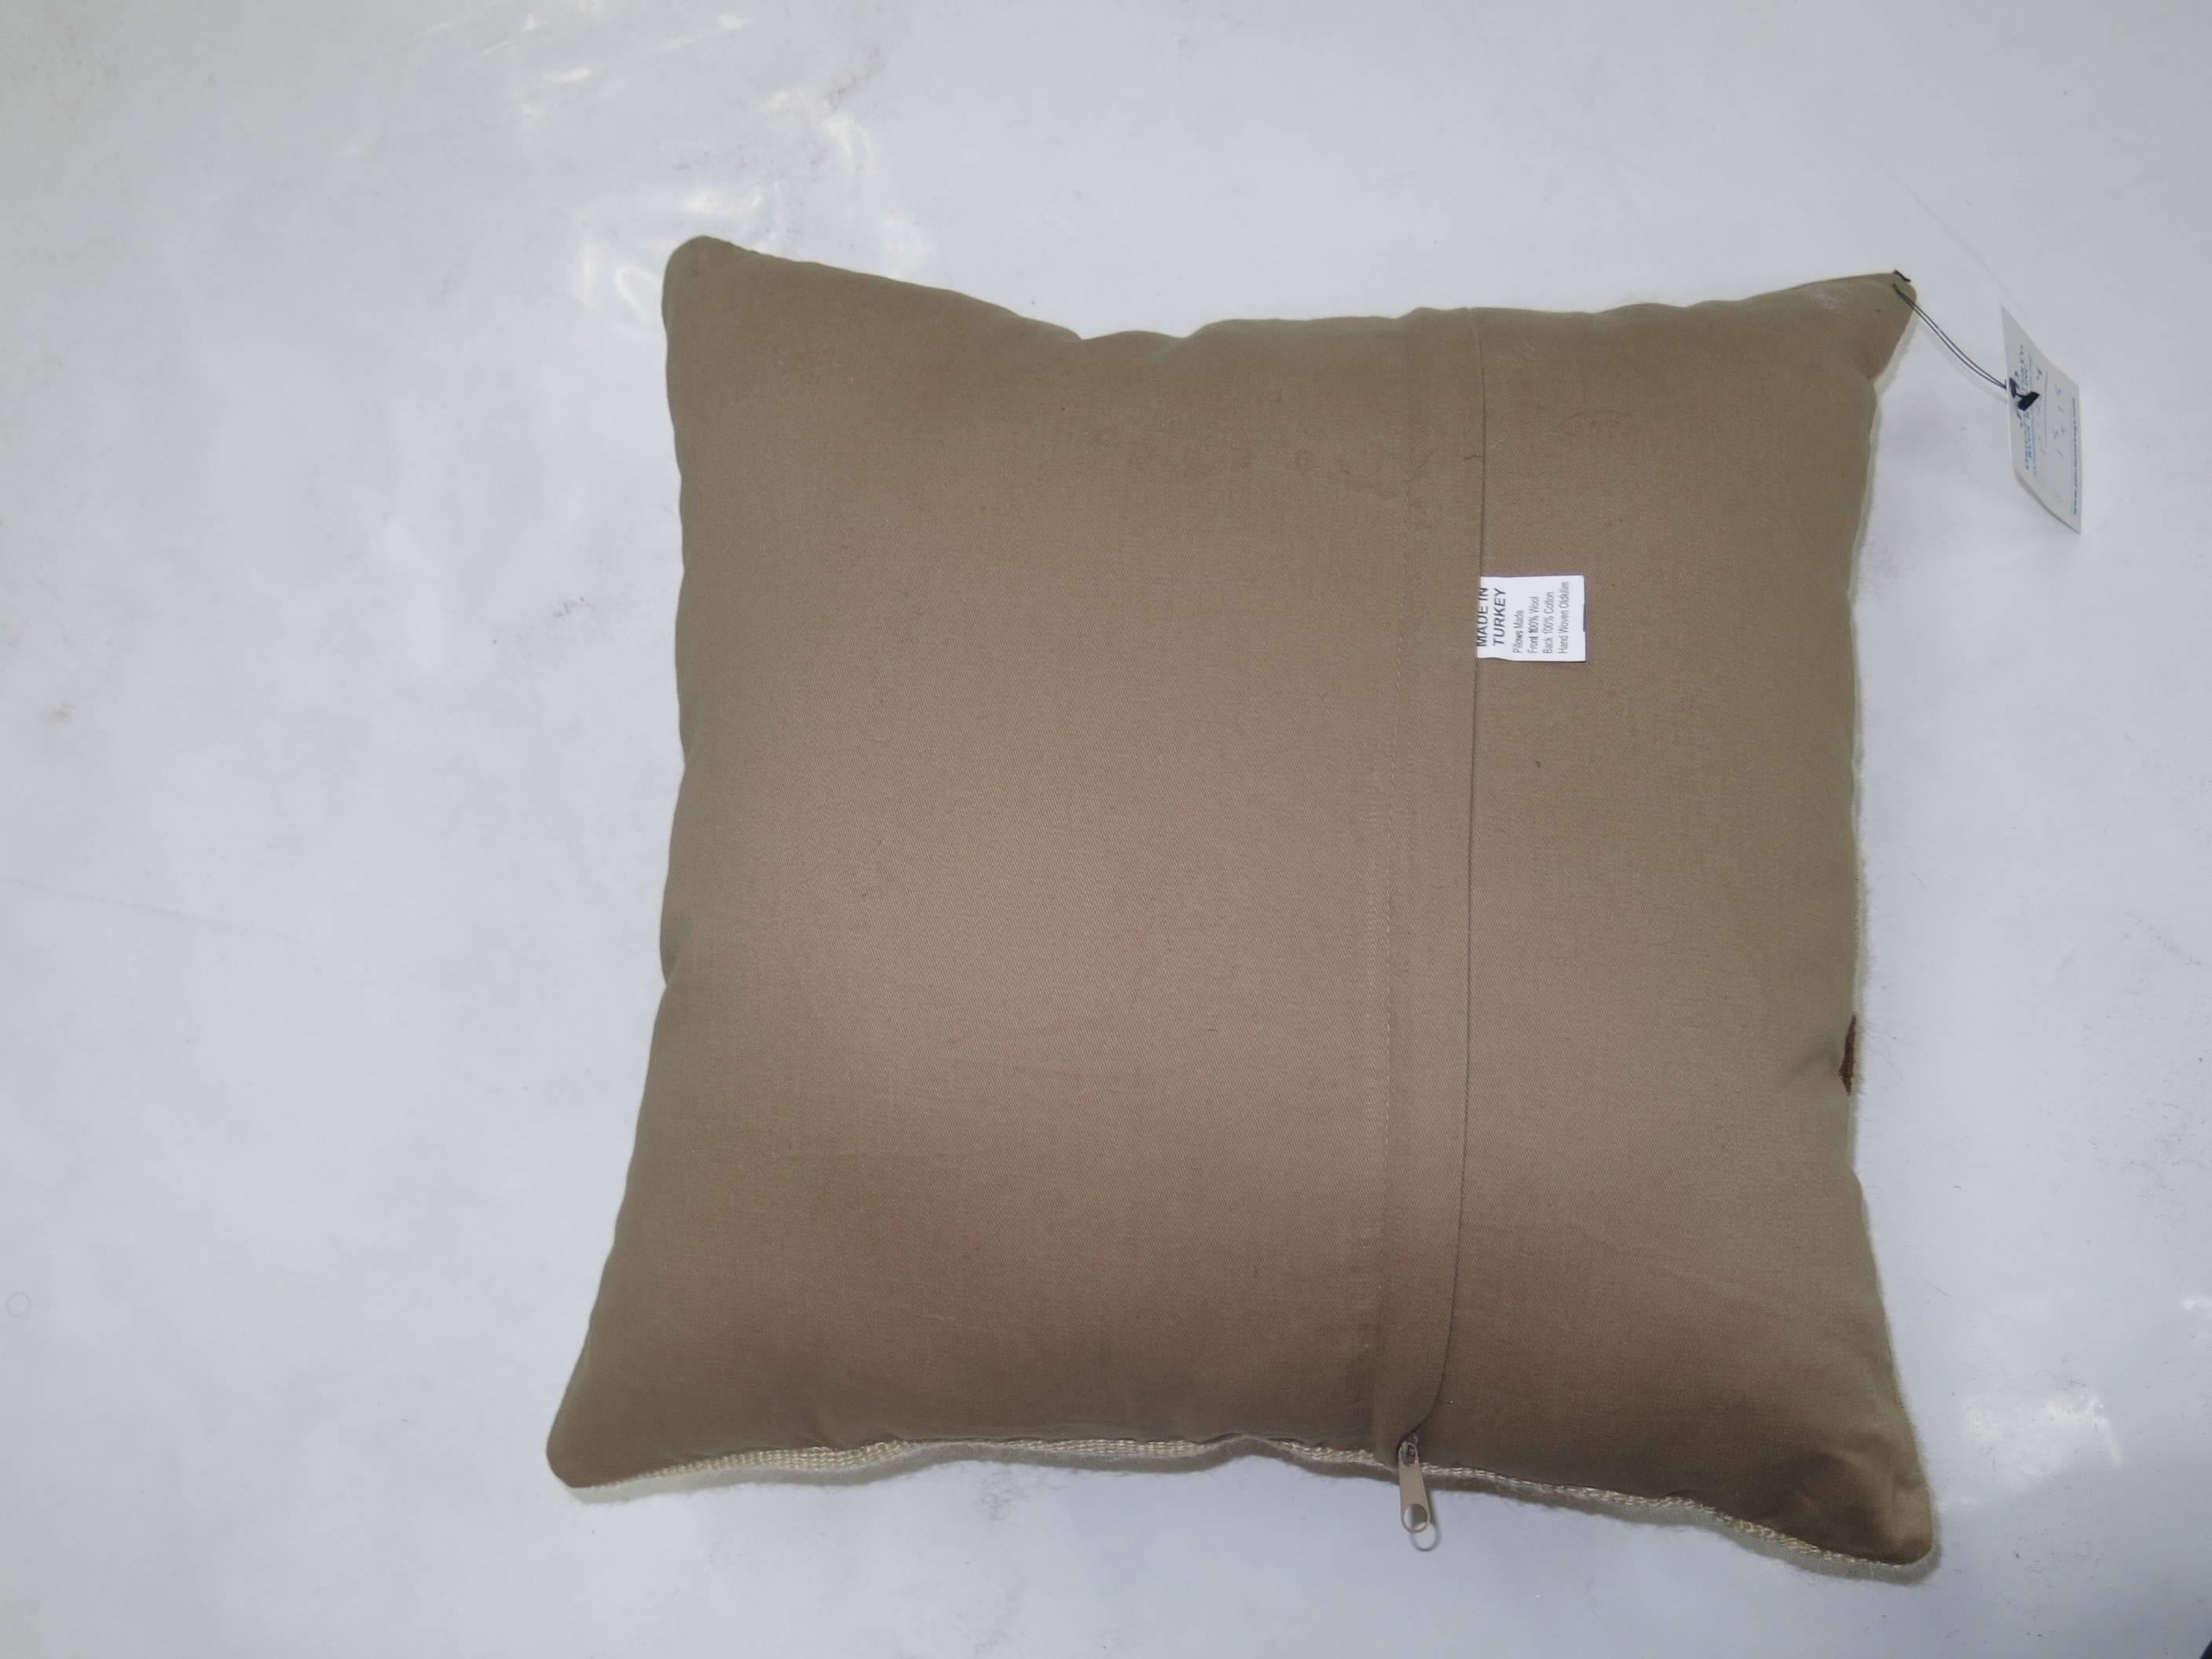 Pillow made from a mohair rug. Solid ivory with brown motif towards one end. Zipper closure and foam insert provided.